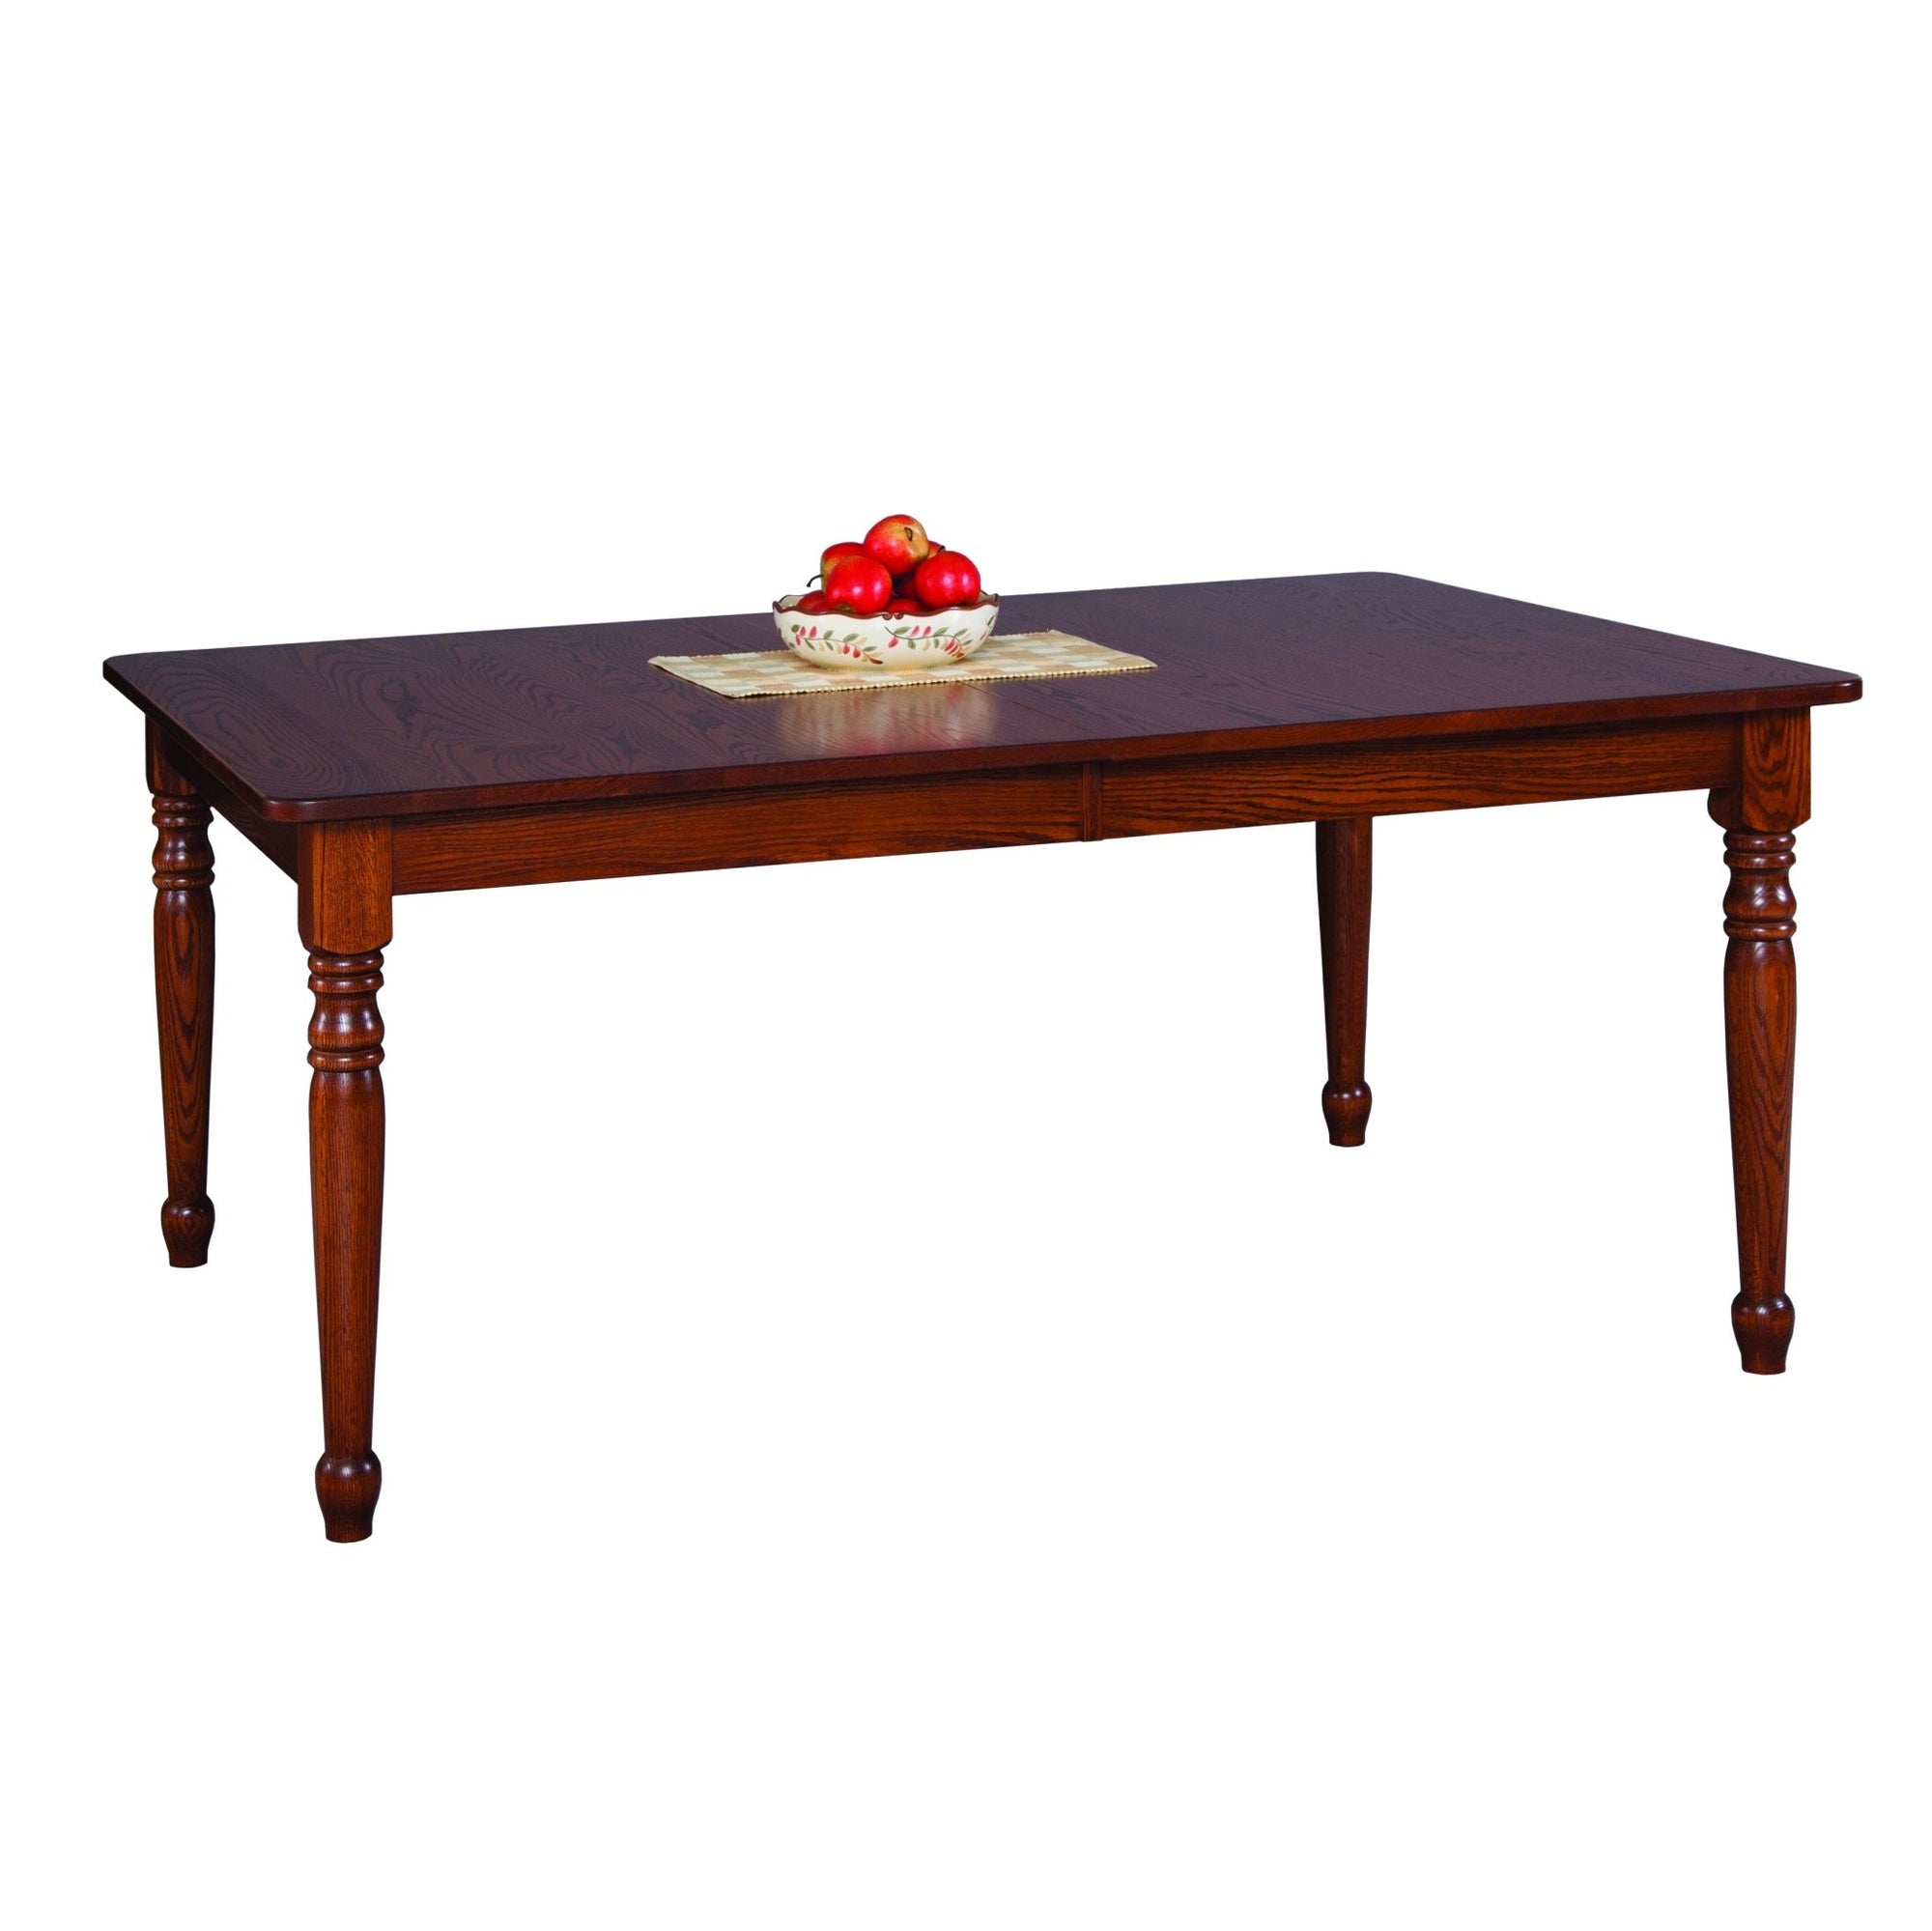 Homestead Table - snyders.furniture